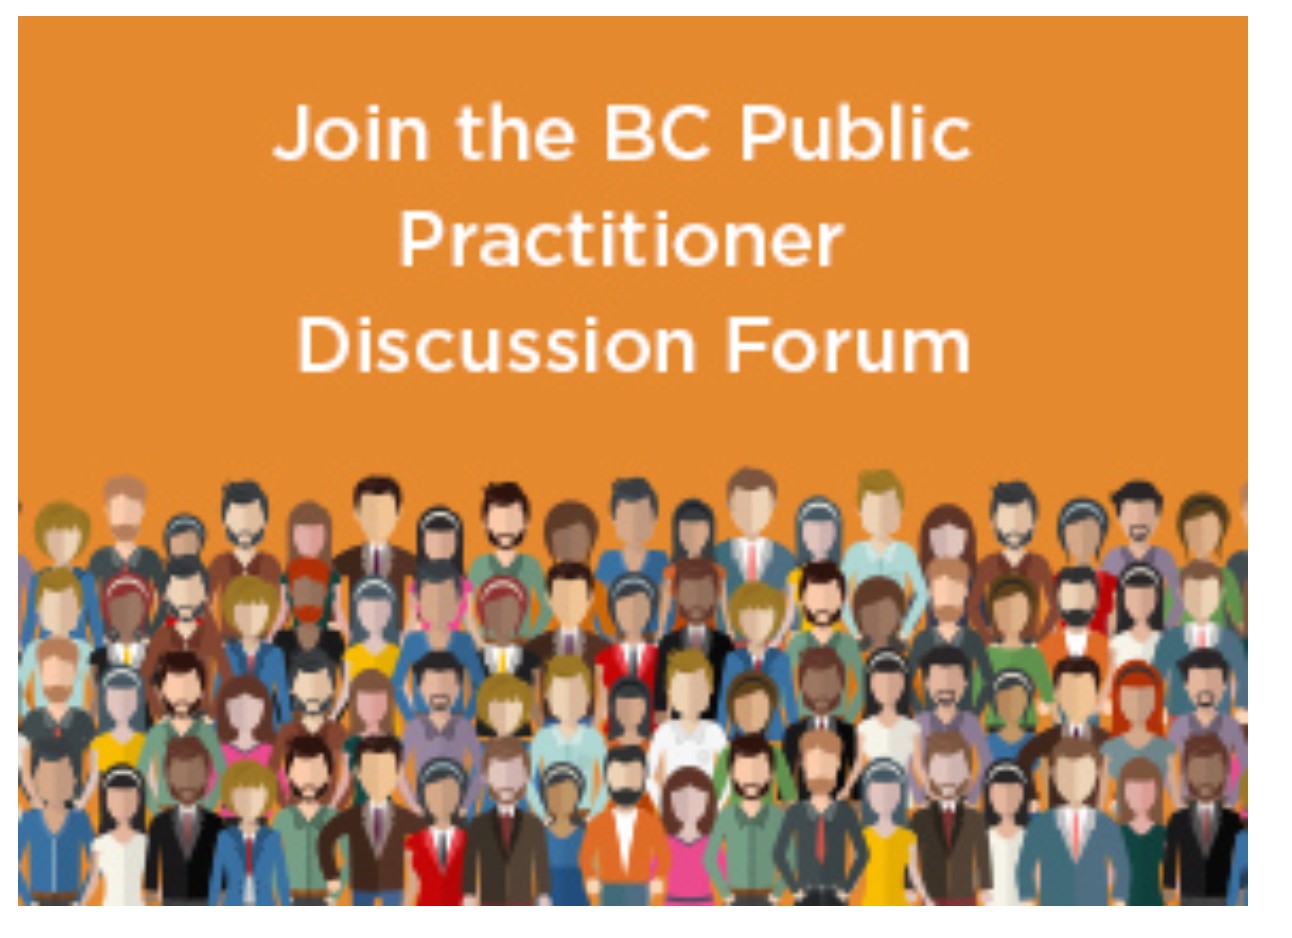 Join the BC Public Practitioner Discussion Forum